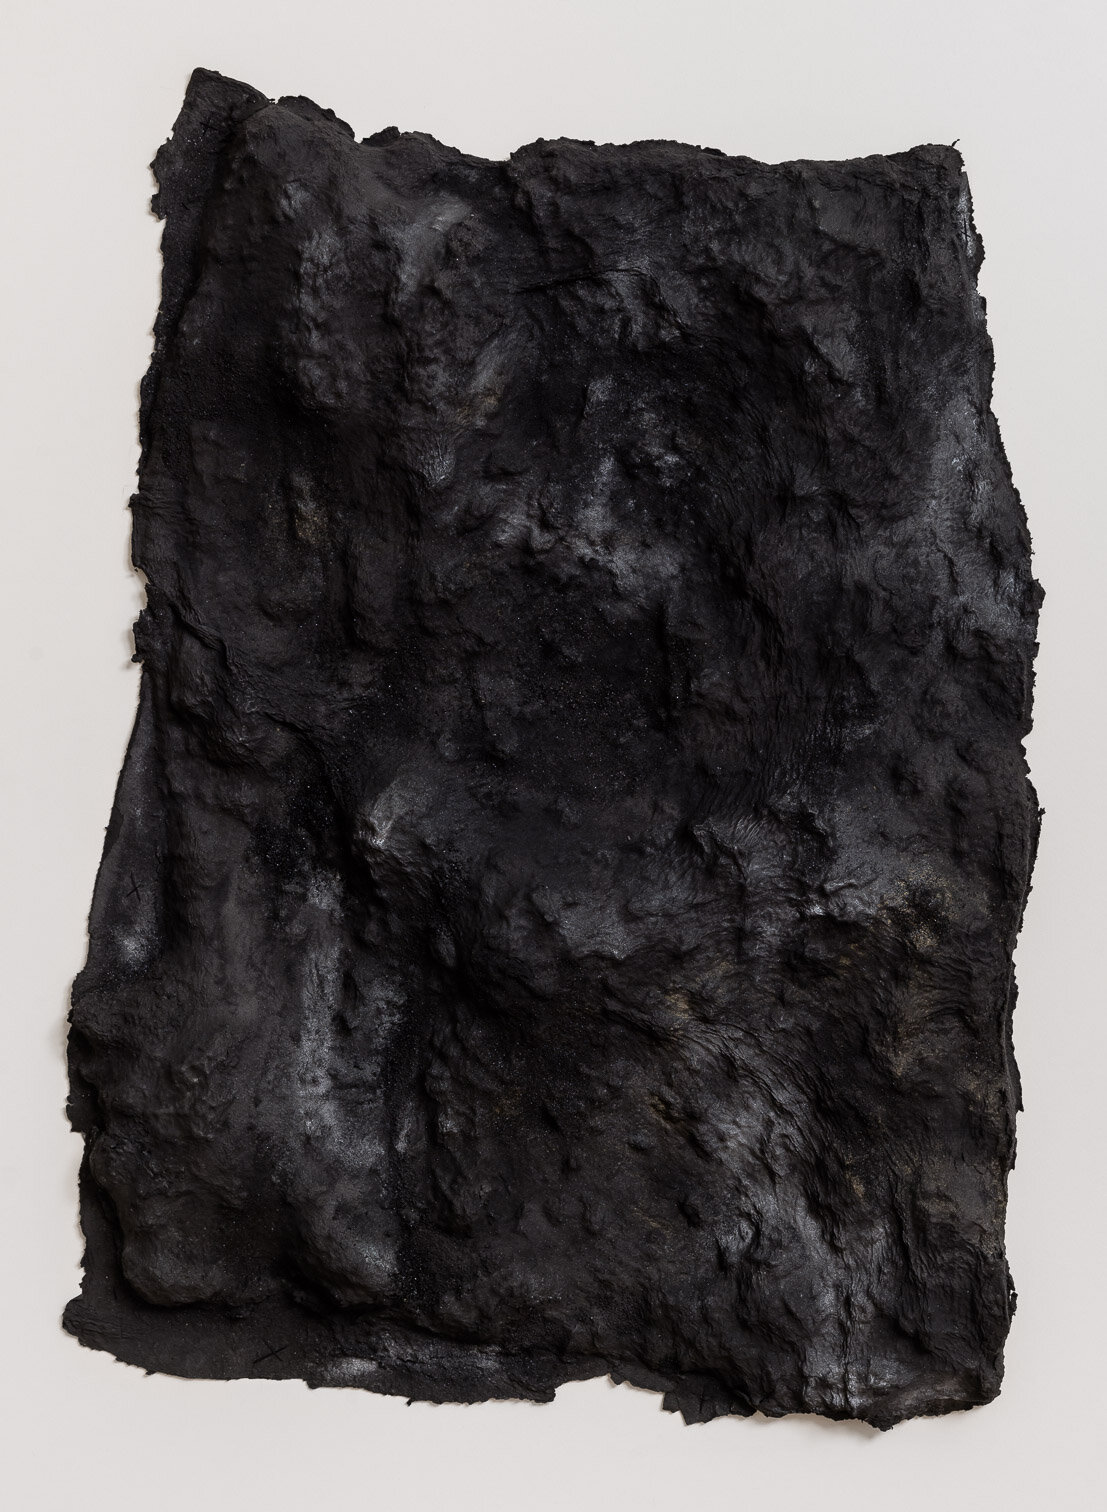   Blane De St. Croix   Lava Bed, Kilauea 1 , 2015. Paper and metal powders. 43 x 31 x 3 inches. Image credit: Etienne Frossard. 